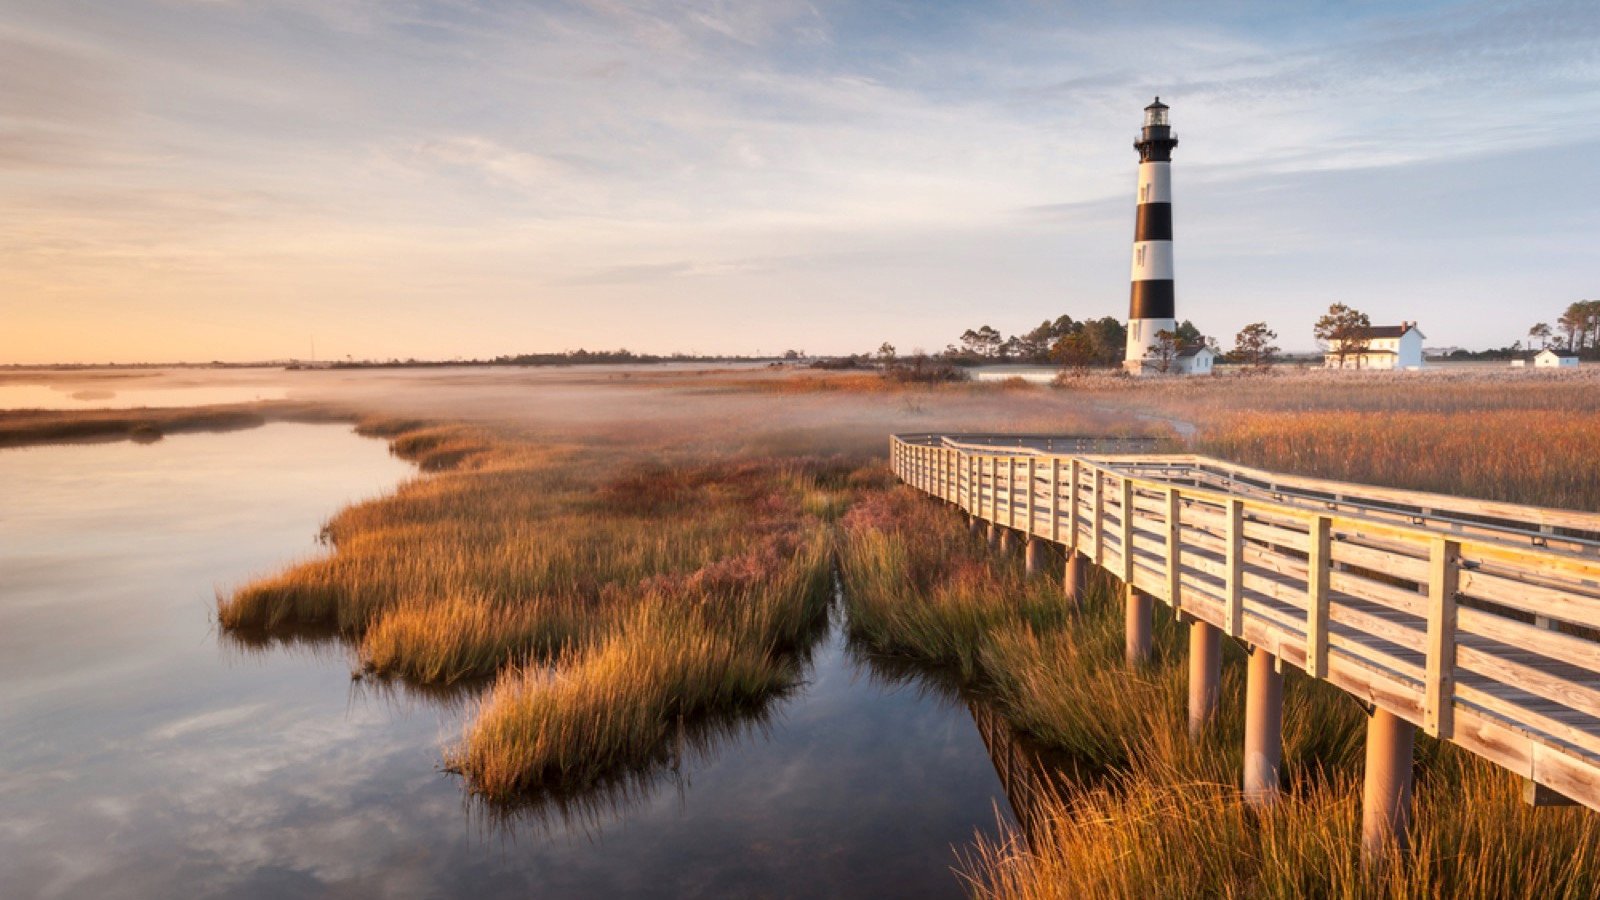 <p>The coast of North Carolina offers this 130-mile road trip, starting in Kitty Hawk and ending at Ocracoke Island. You’ll discover scenic barrier islands and historic lighthouses like Cape Hatteras and the Bodie Island Lighthouse.</p><p>Jockey’s Ridge State Park offers stunning scenery with its towering dunes and the historic Elizabethan Gardens in Manteo. Along the route, indulge your taste buds at restaurants such as The Mad Crabber, Kill Devil Grill, and Owens’ Restaurant, all located in towns along the route.</p>